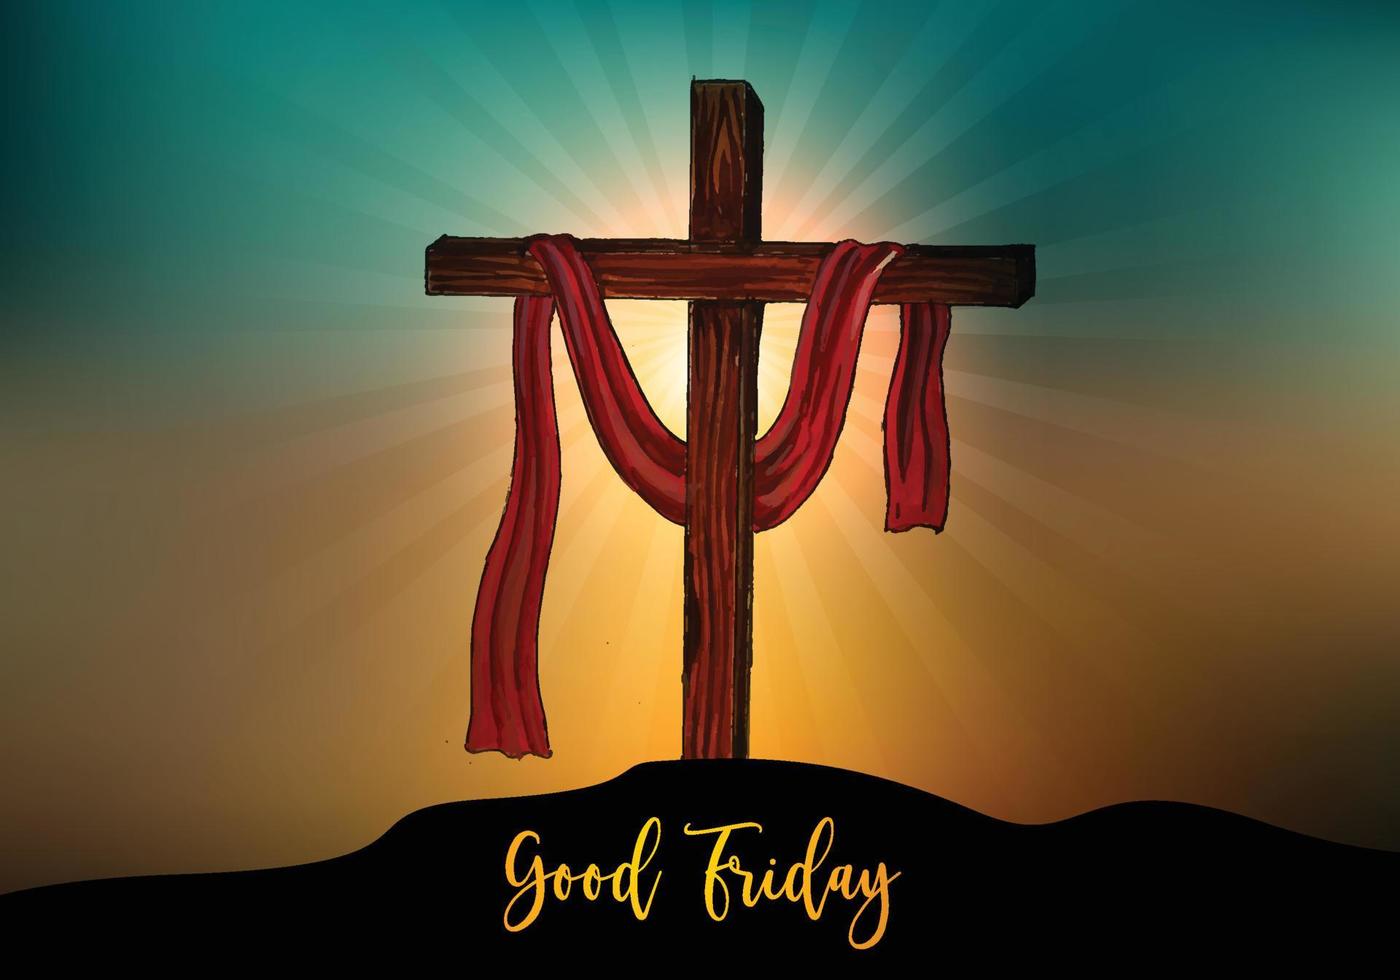 Good Friday background with cross and sun rays in the sky vector